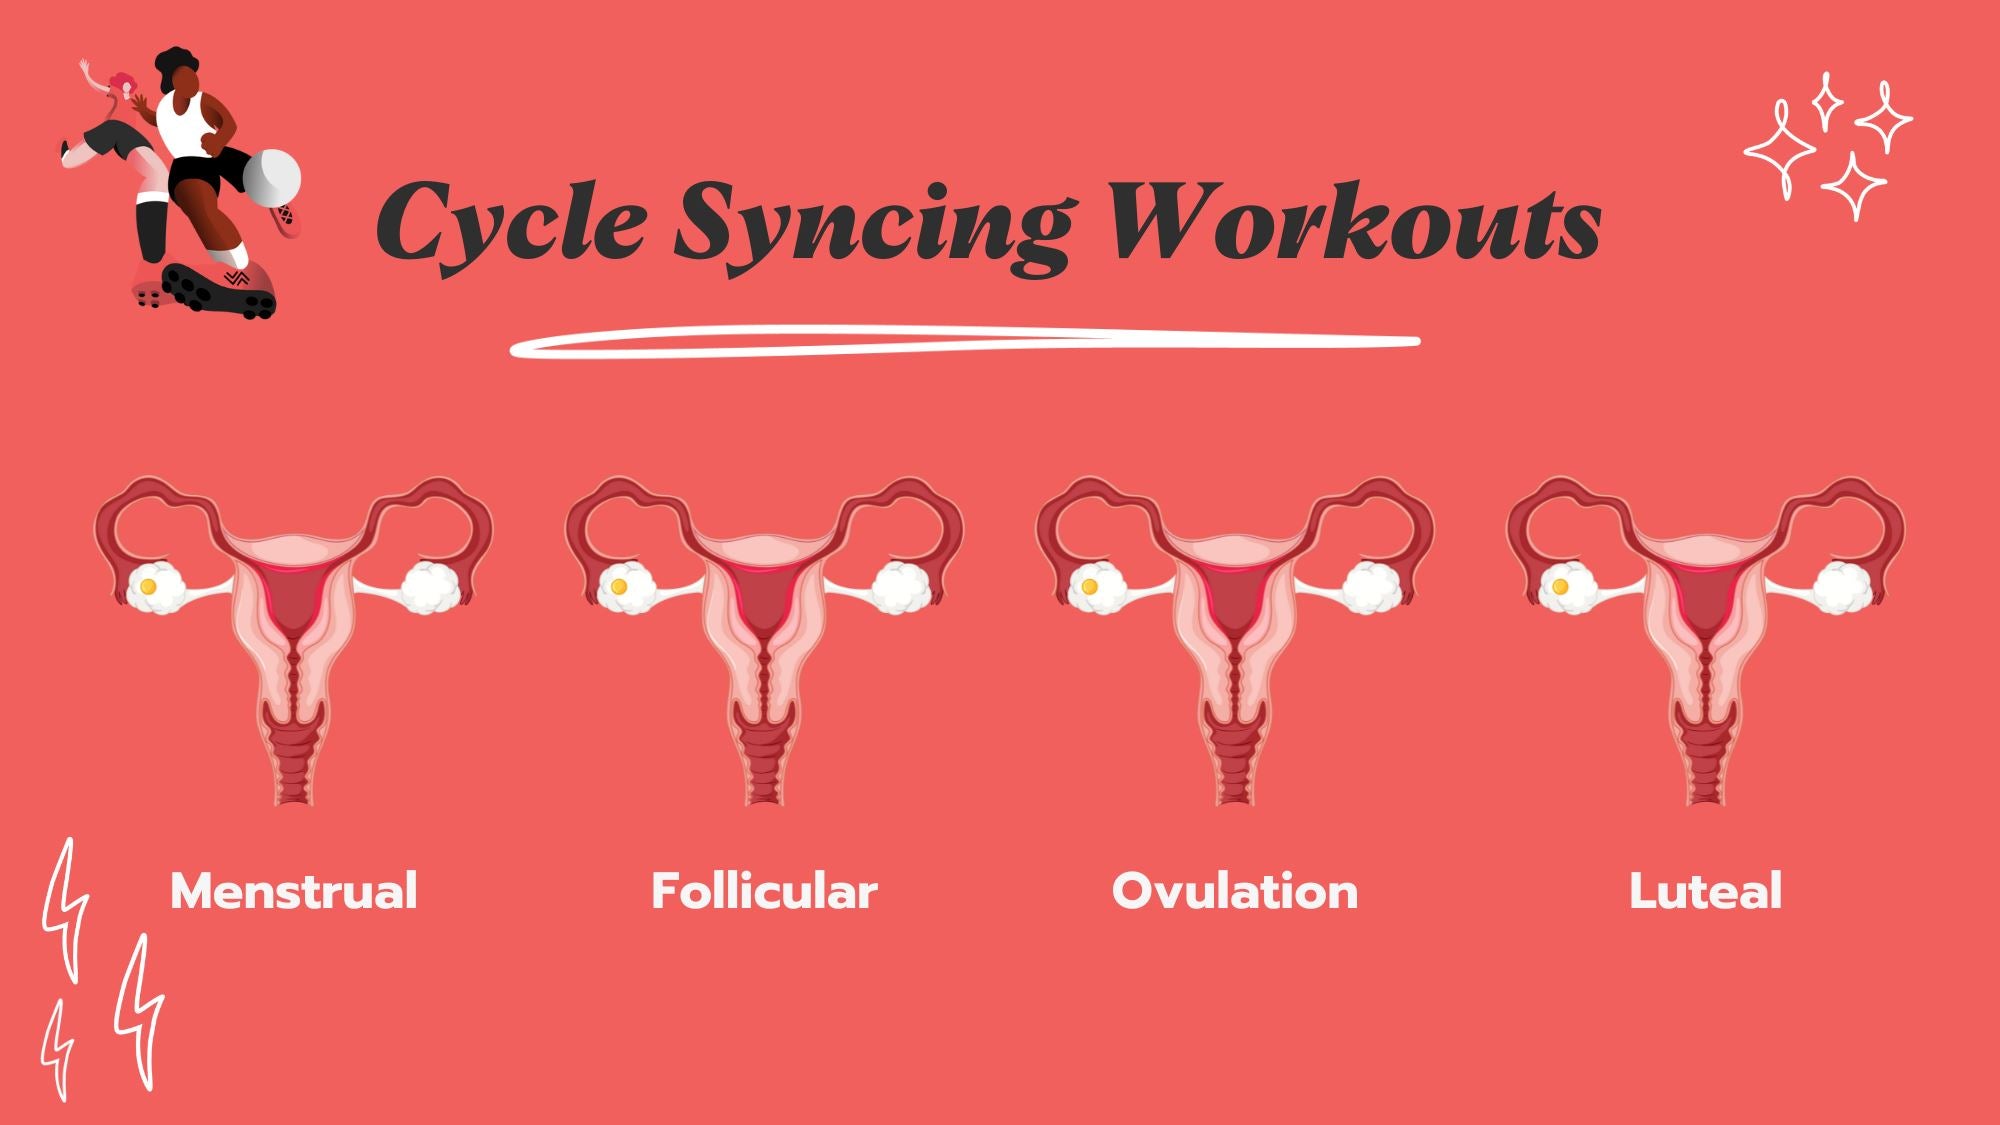 Exercises for Each Stage of your Menstrual Cycle